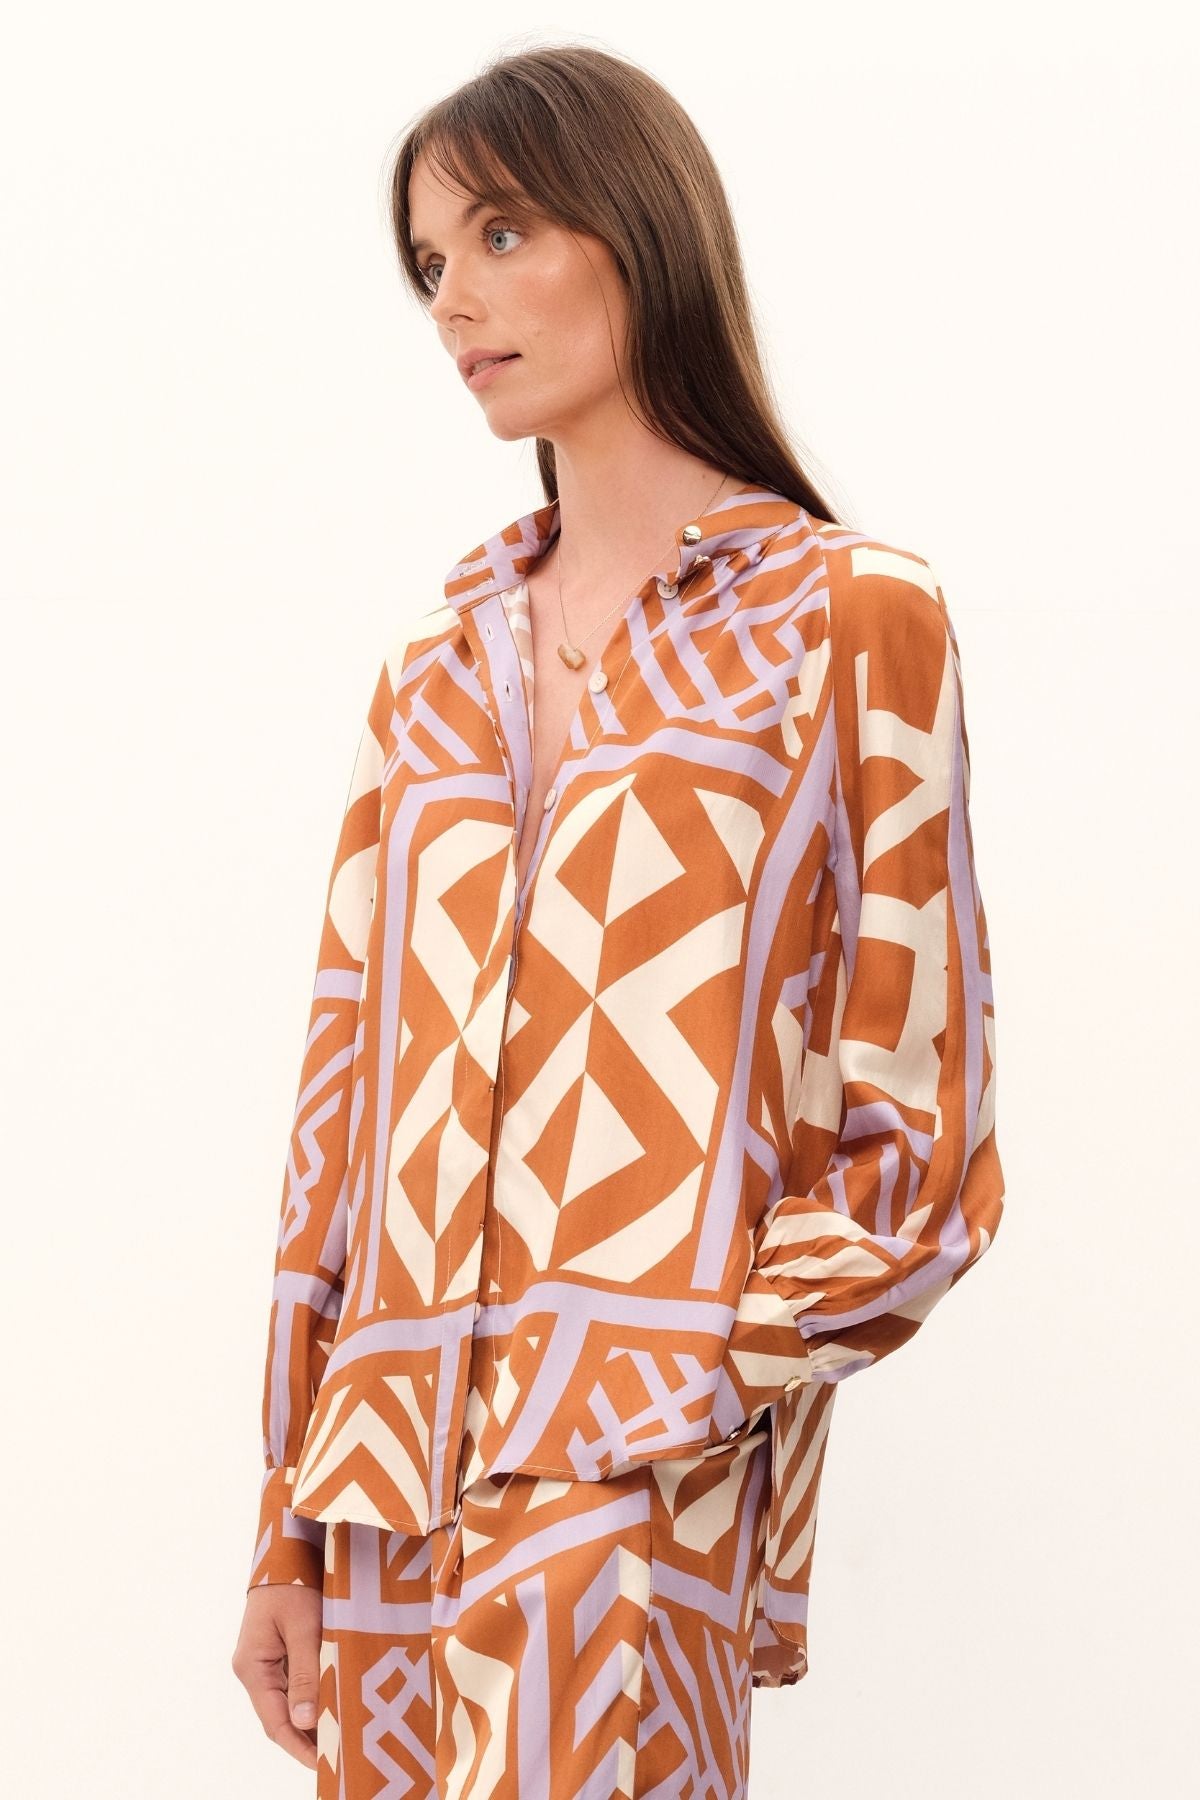 The House of Mirrors Blouse by GINGER & SMART has a bold geometric print in shades of crème, lilac, and tan. It includes a mandarin-style collar, concealed front placket, and full raglan sleeves with cuffs. Made with luxurious silk twill.